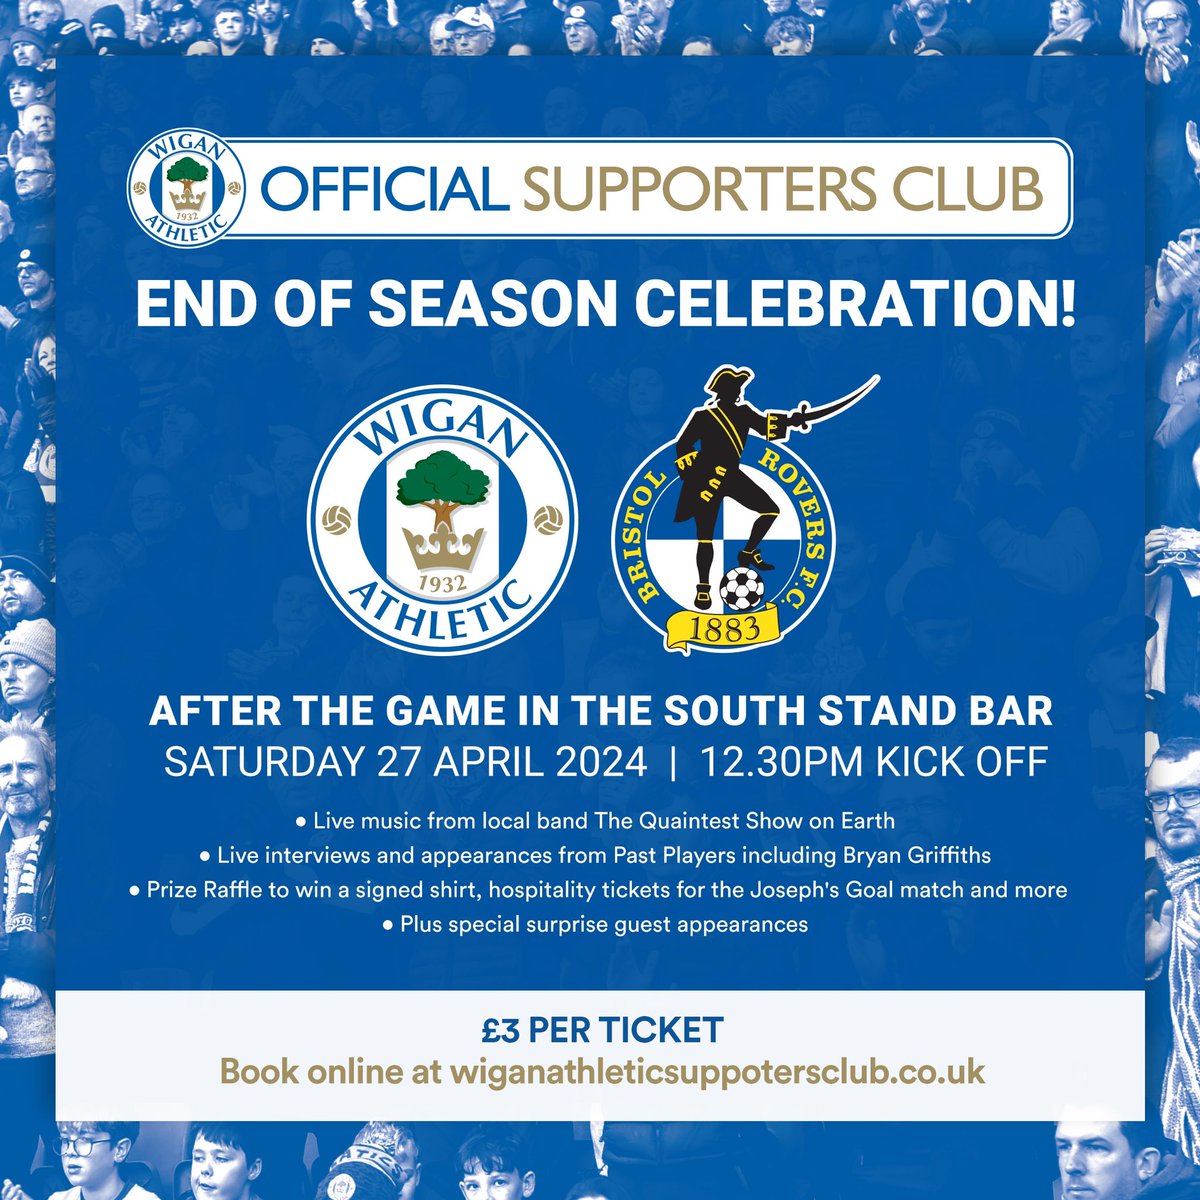 Join us after the Bristol Rovers game to celebrate our season after the challenges we have faced in recent times! Tickets are just £3 for members and £5 for non members. We’ve got a free raffle, live music, past players and special guests! Book your ticket via our website now!…